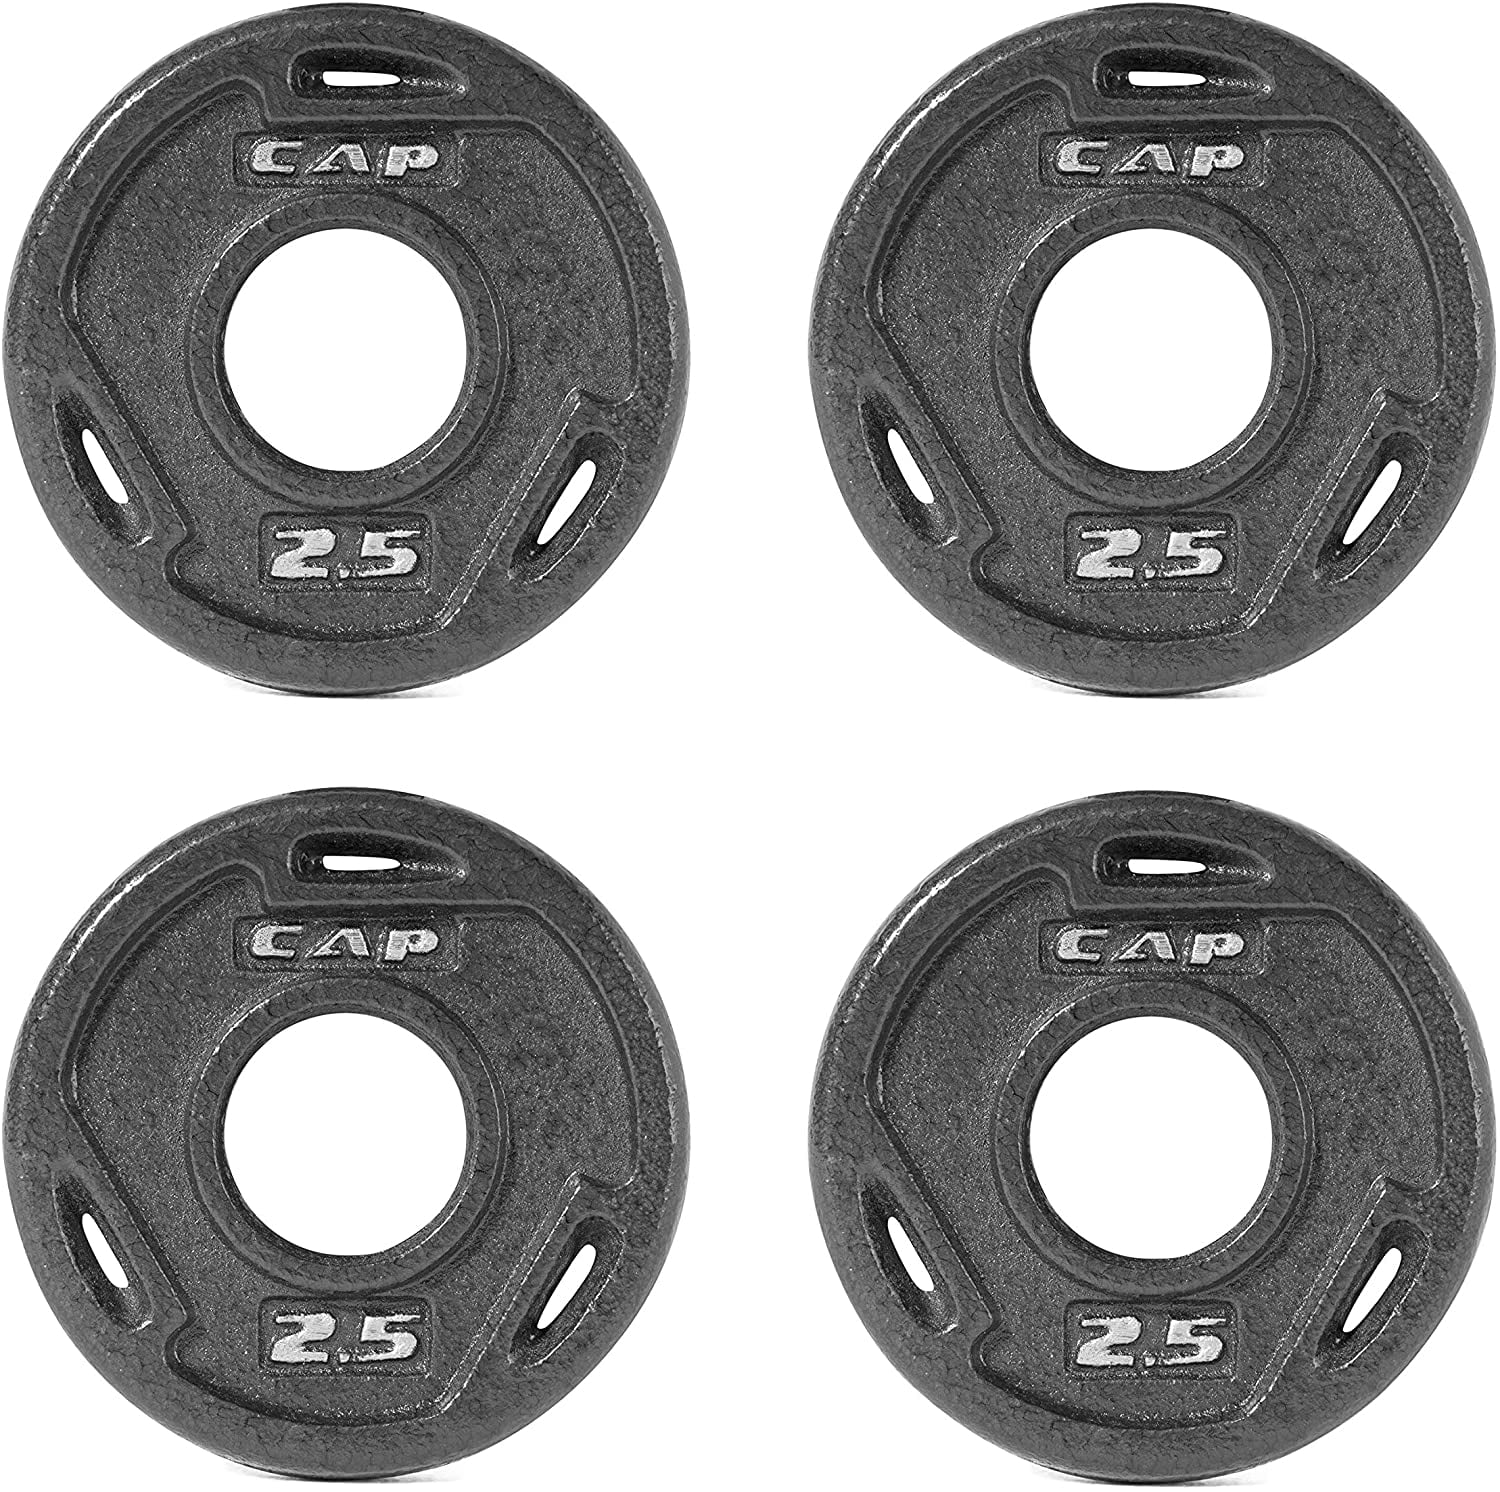 2.5 lb Cap 2-Inch Olympic Grip Weight Plate Set of 6 